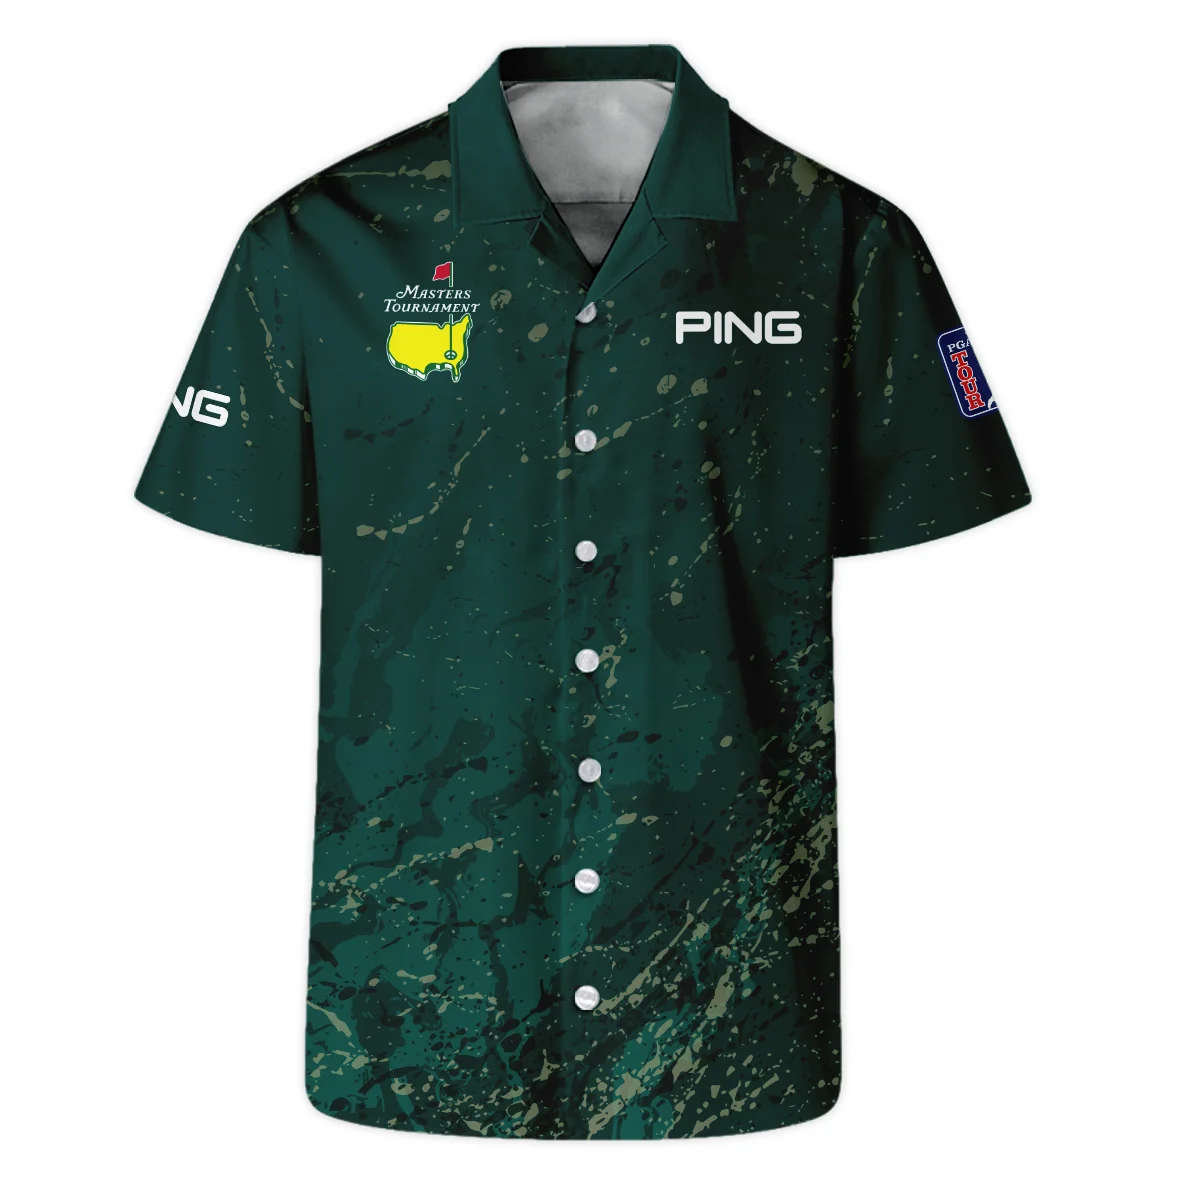 Old Cracked Texture With Gold Splash Paint Masters Tournament Ping Polo Shirt Style Classic Polo Shirt For Men